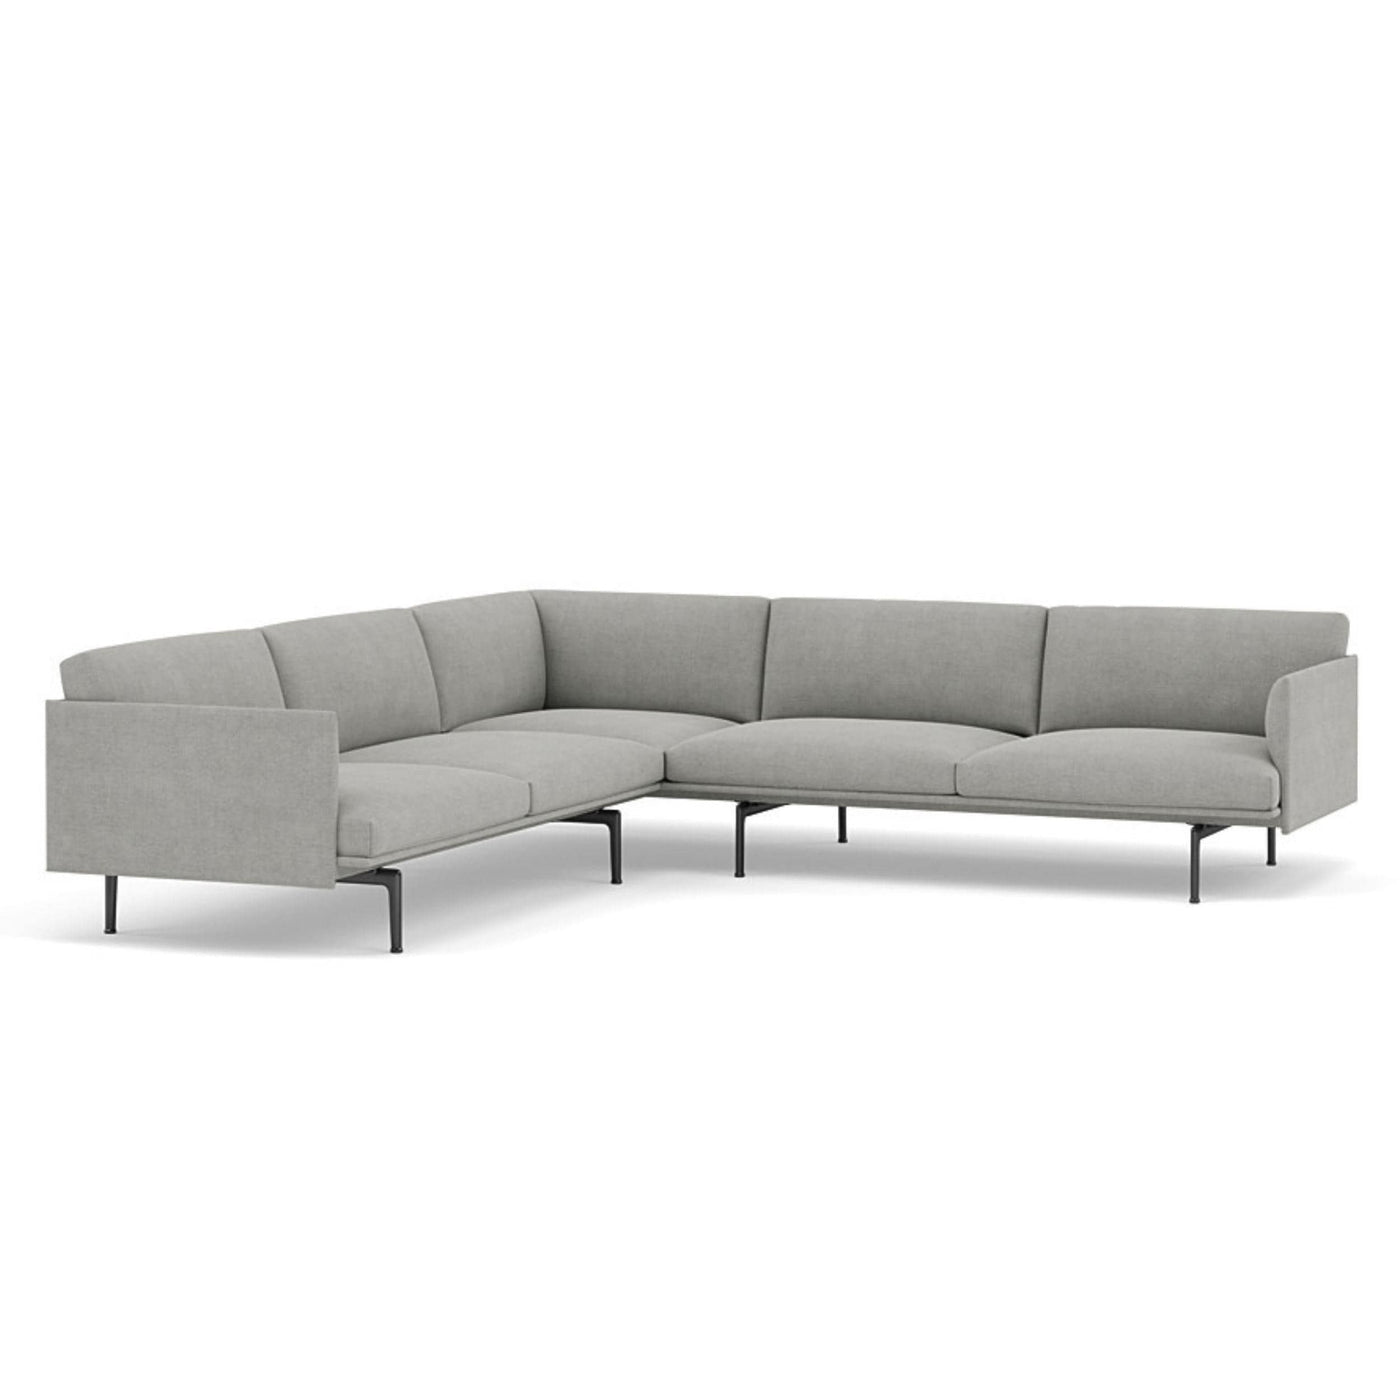 Muuto outline corner sofa in fiord 151 grey fabric and black legs. Made to order from someday designs. #colour_fiord-151